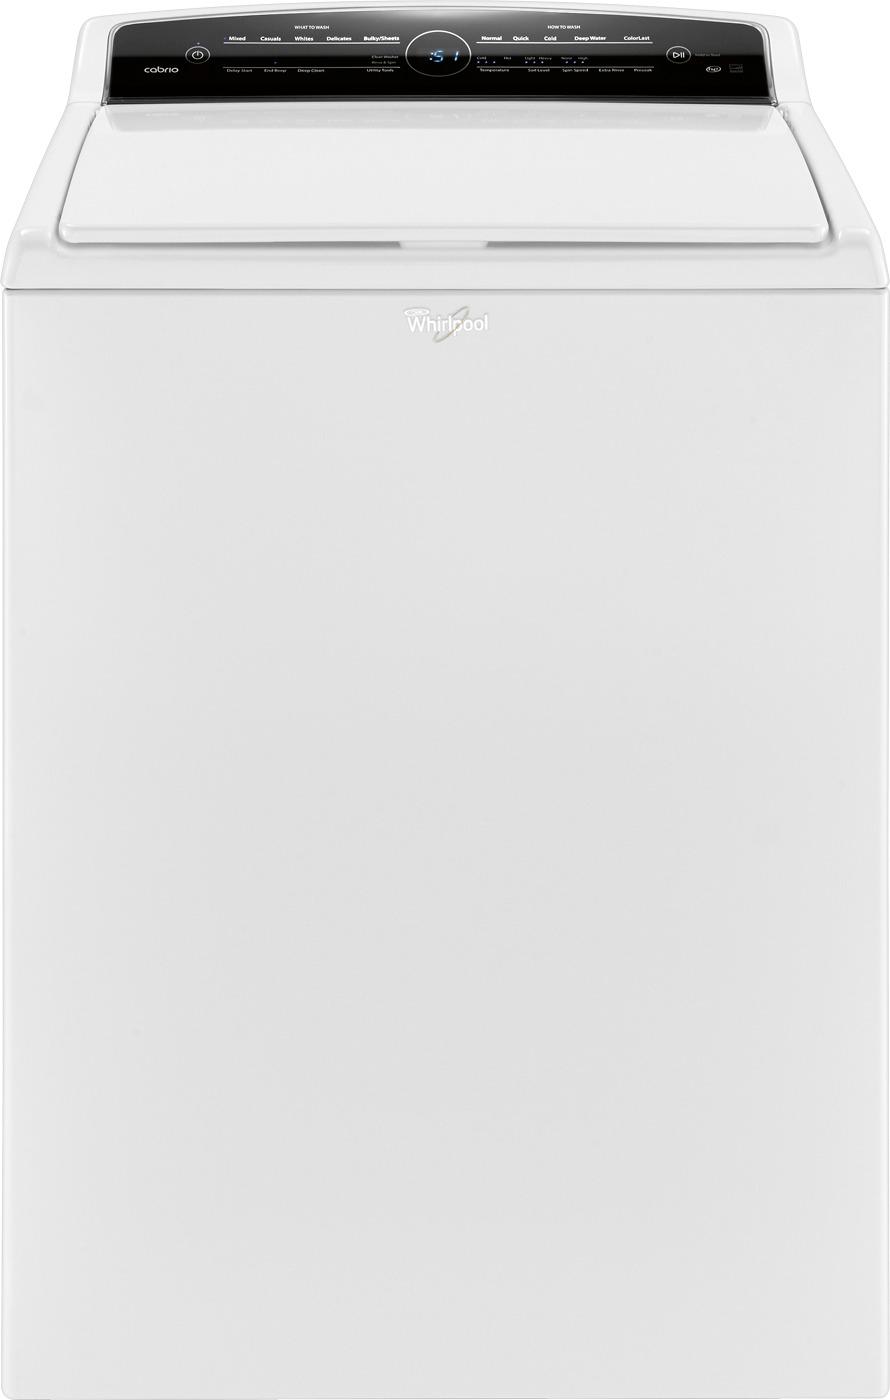 Best Buy Whirlpool Cabrio 4 8 Cu Ft 26 Cycle High Efficiency Top Loading Washer White Wtw7000dw,Tommy Pickles Maternal Grandparents